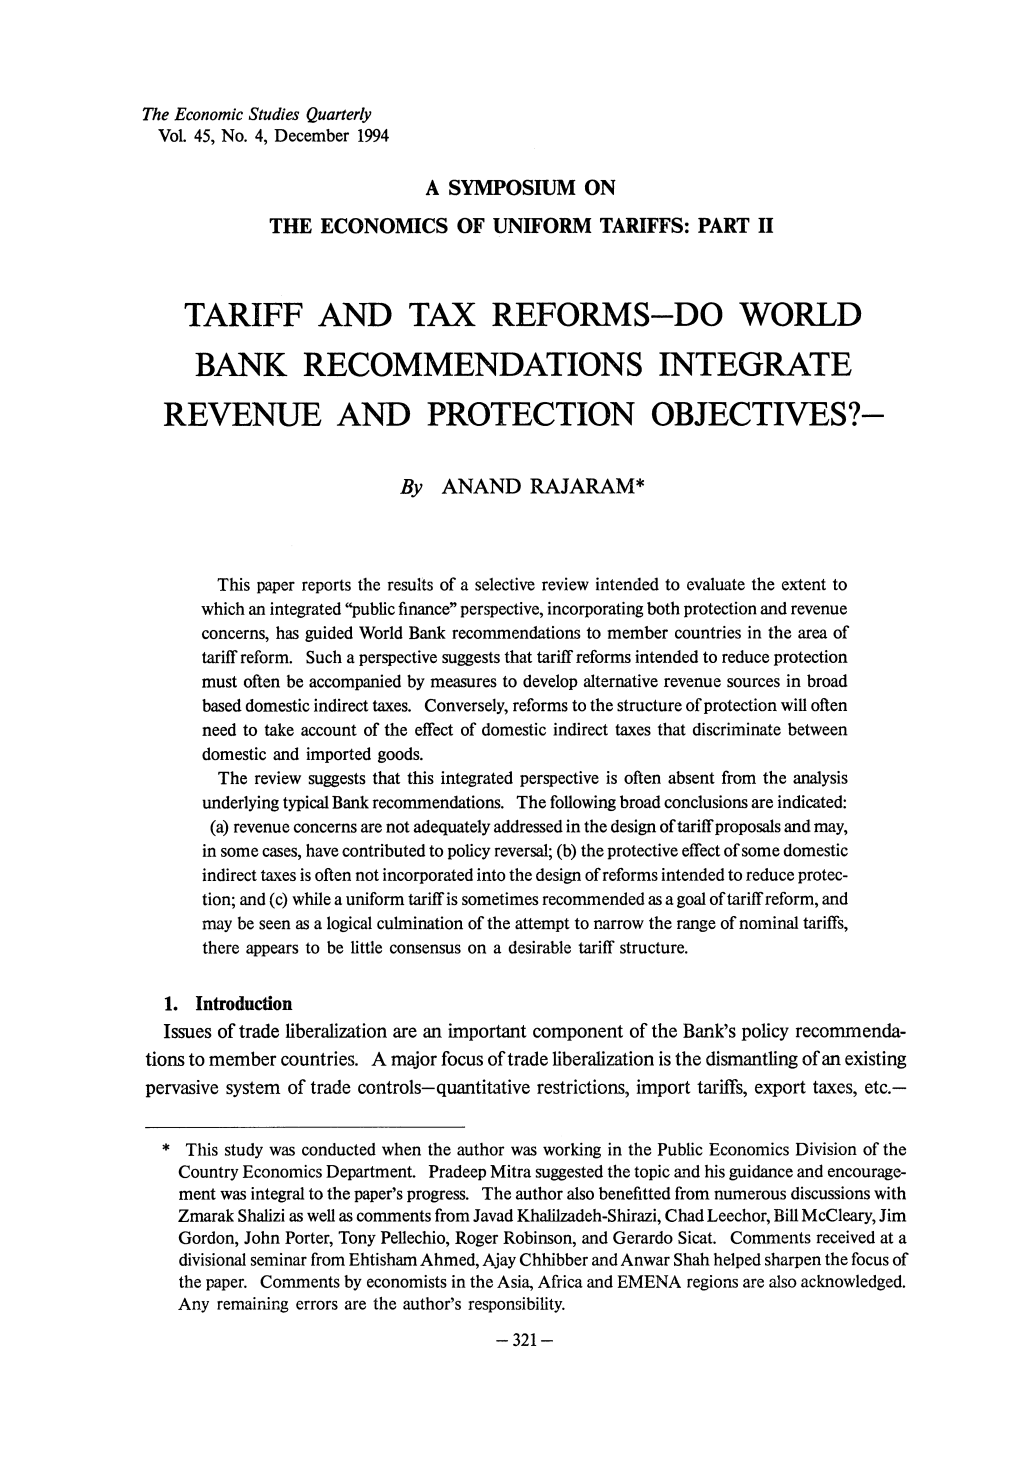 Tariff and Tax Reforms-Do World Bank Recommendations Integrate Revenue and Protection Objectives?